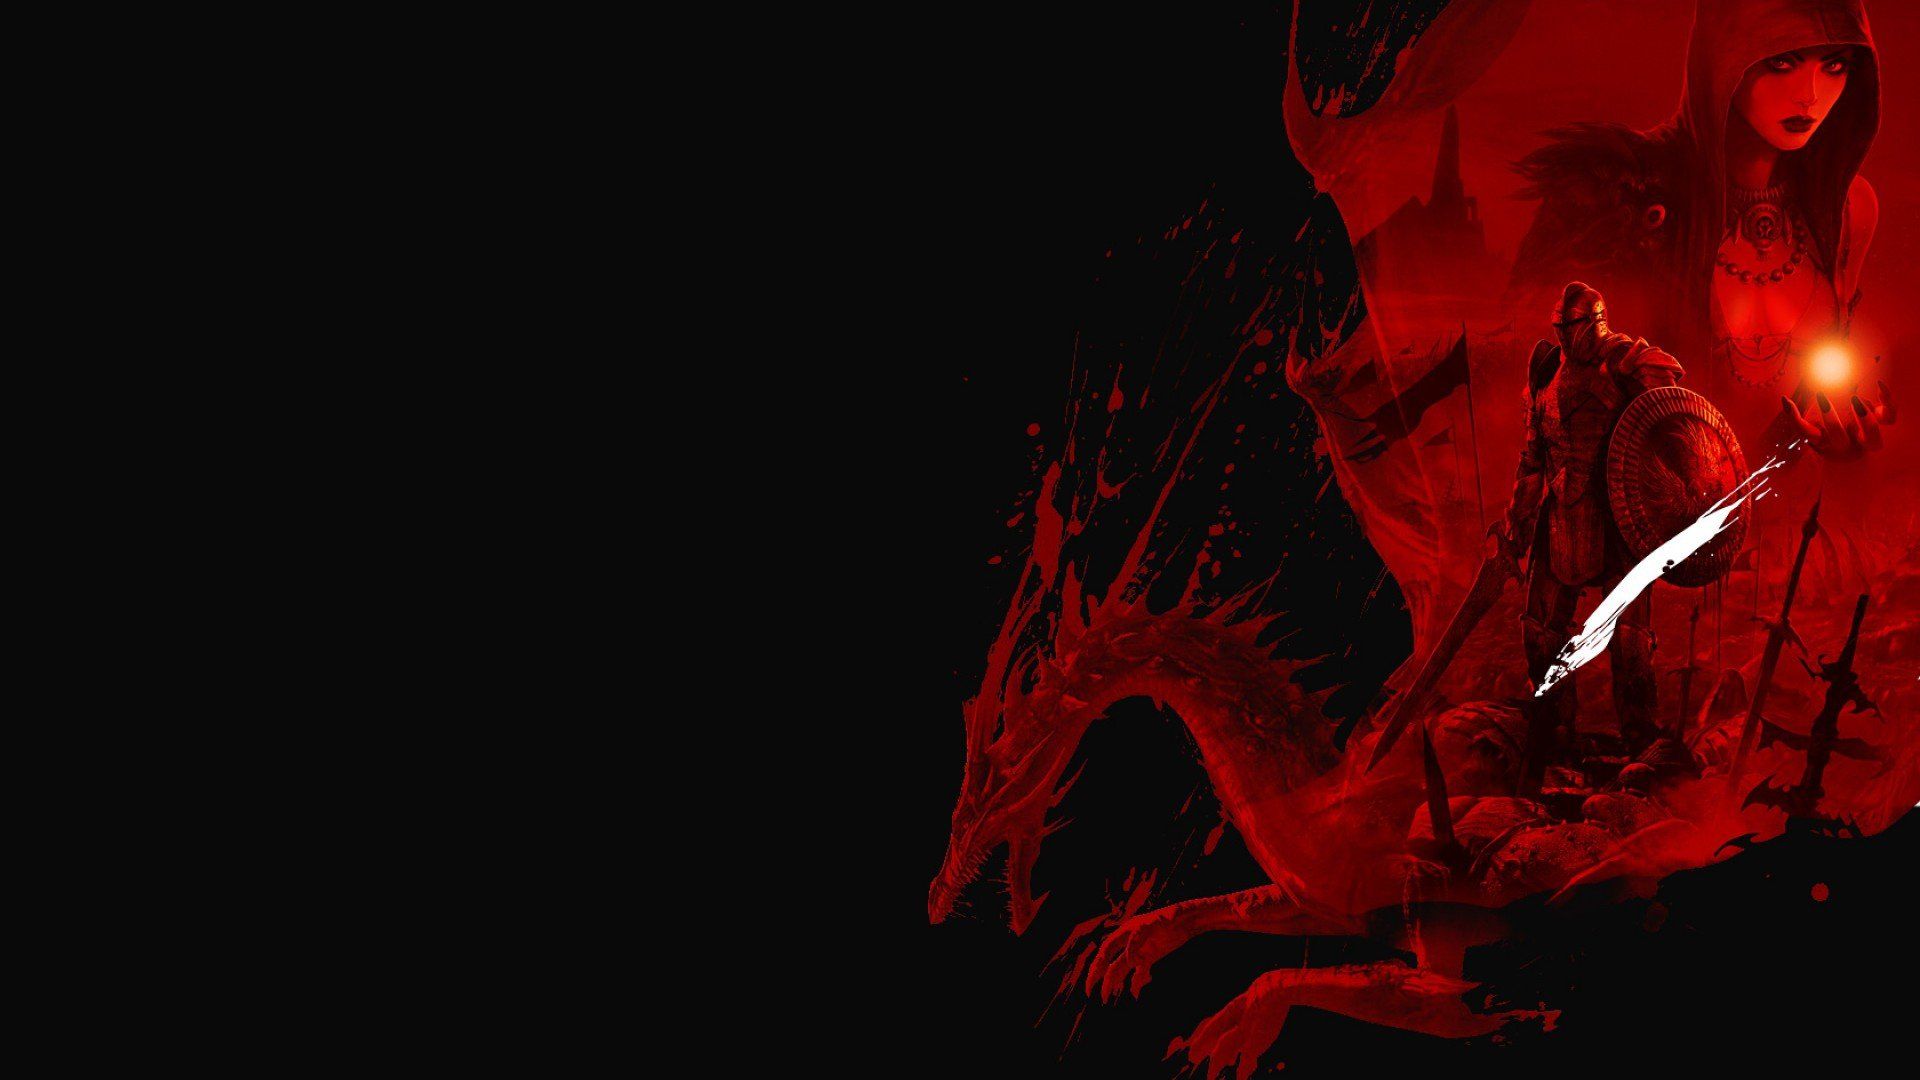 Download Red Dragon Wallpaper Gallery